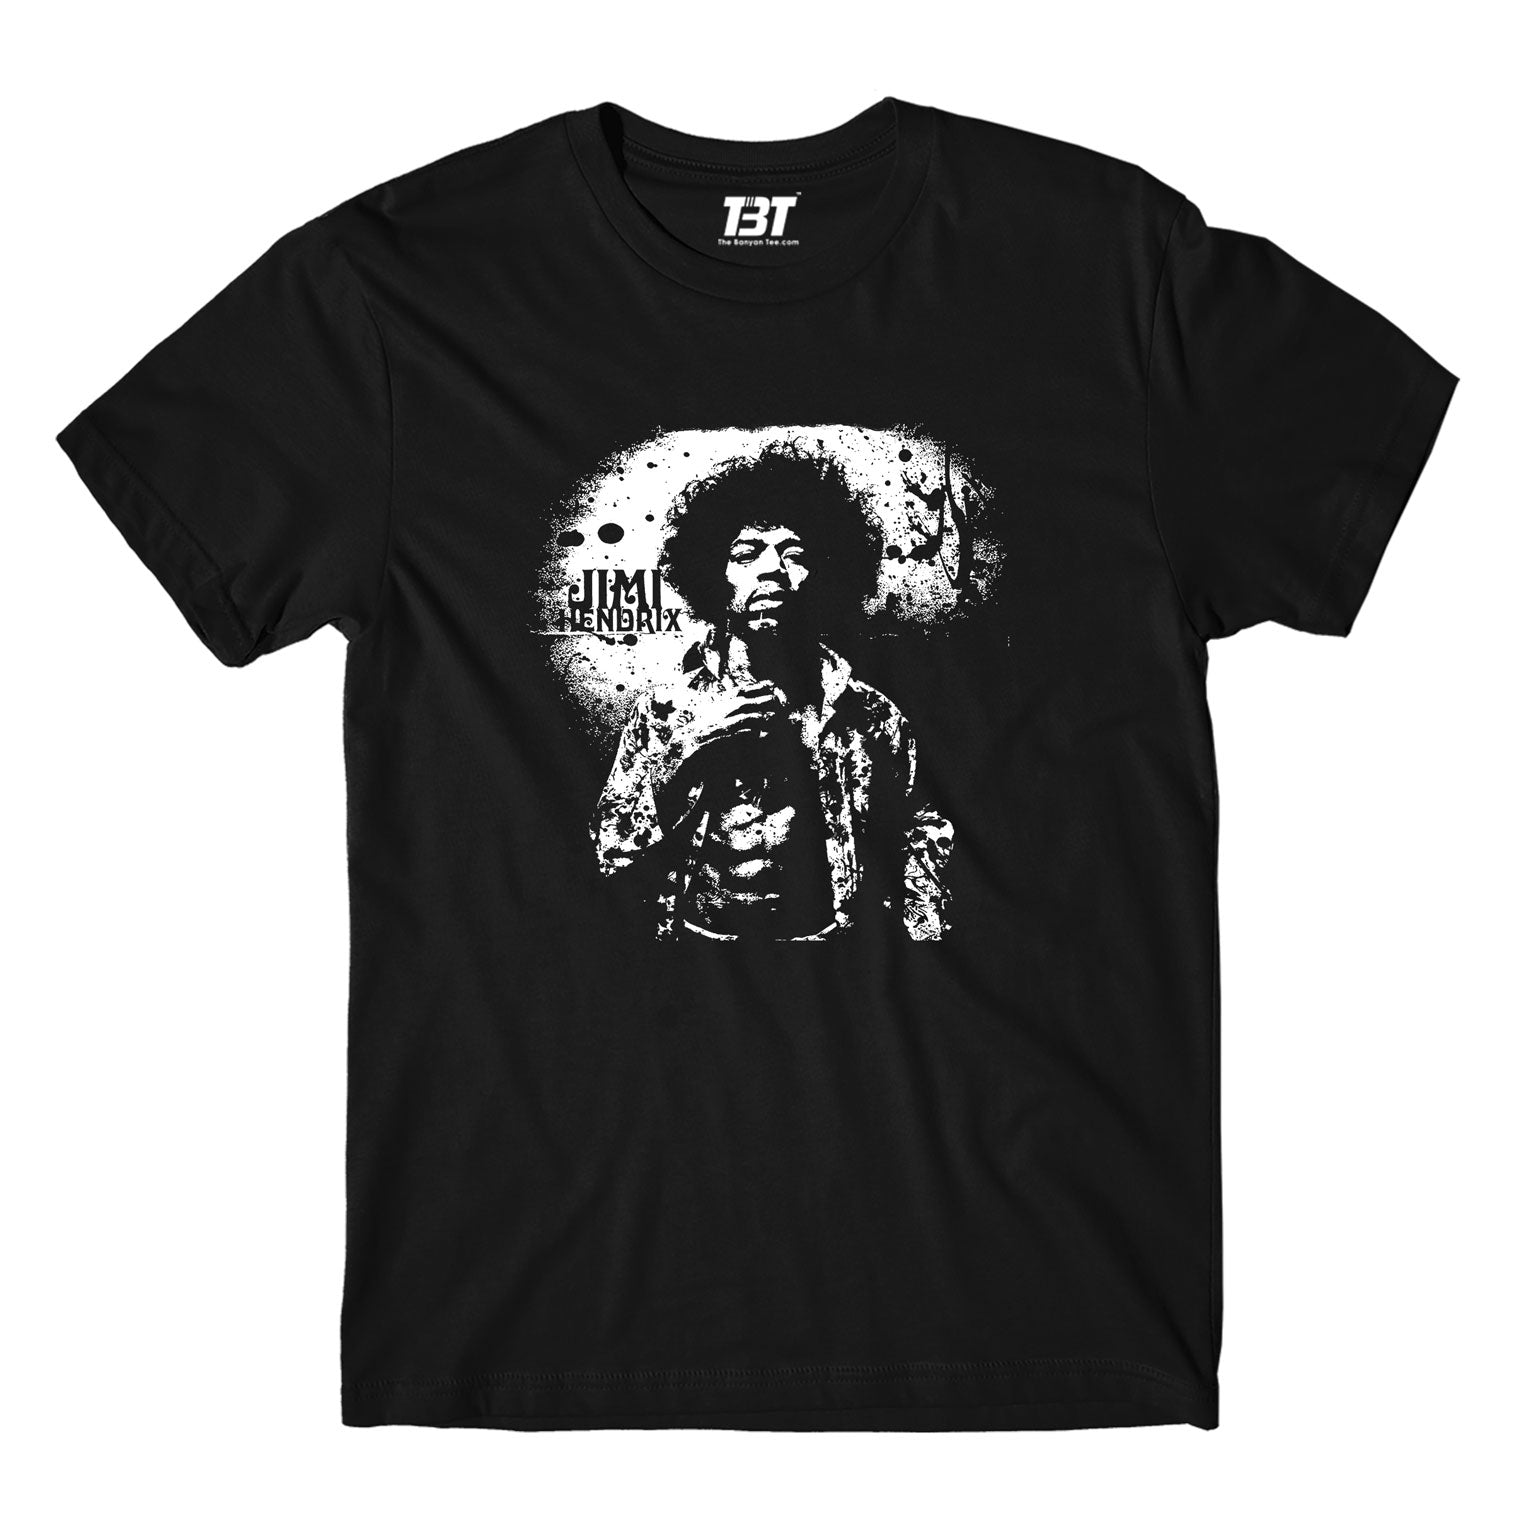 the banyan tee merch on sale Jimi Hendrix T shirt - On Sale - XS (Chest size 36 IN)